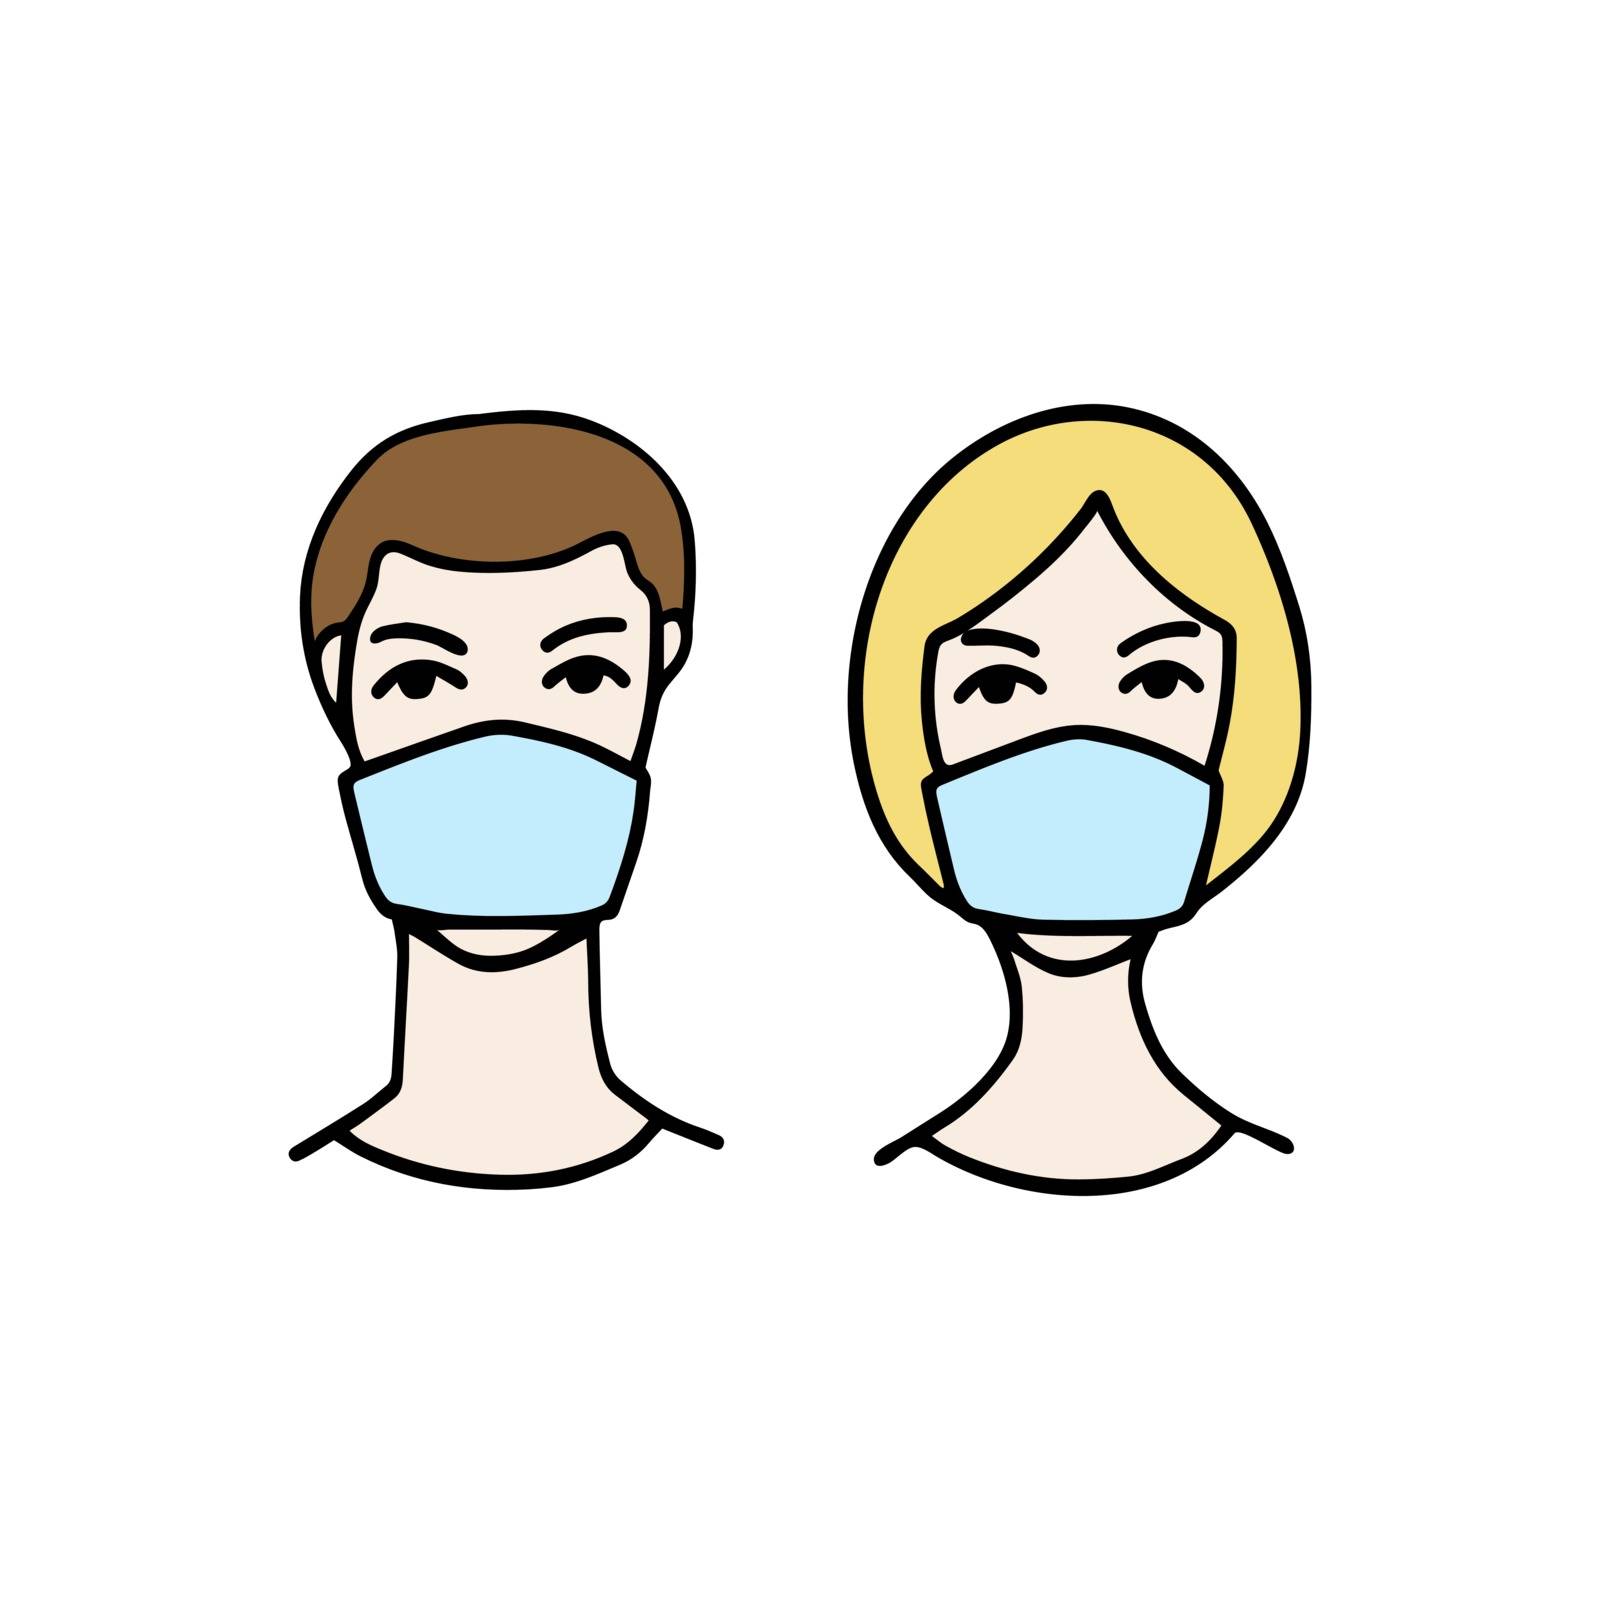 Man and woman wearing protective Medical mask for prevent Wuhan infection. Novel coronavirus 2019-nCoV. Prevention of covid. Global pandemic alert. Covid-19 outbreak.